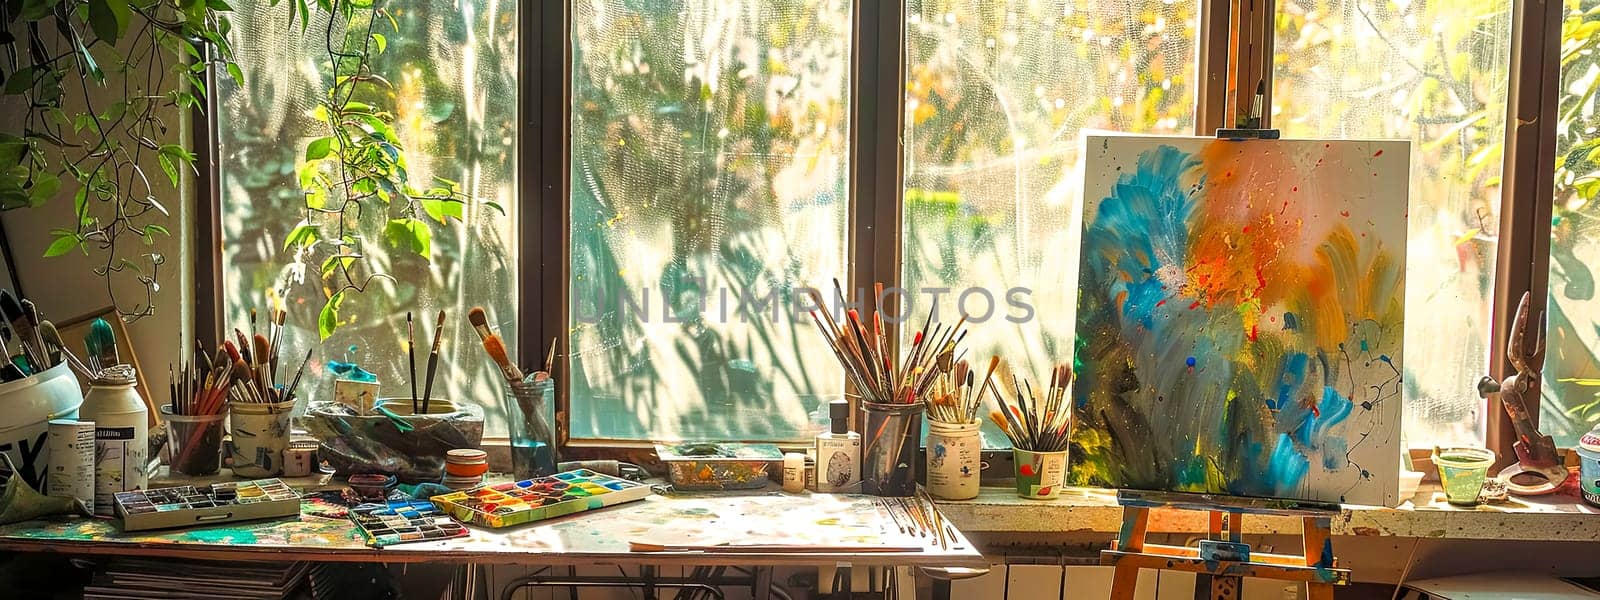 Bright, cozy art studio filled with natural light, brushes, and a colorful canvas